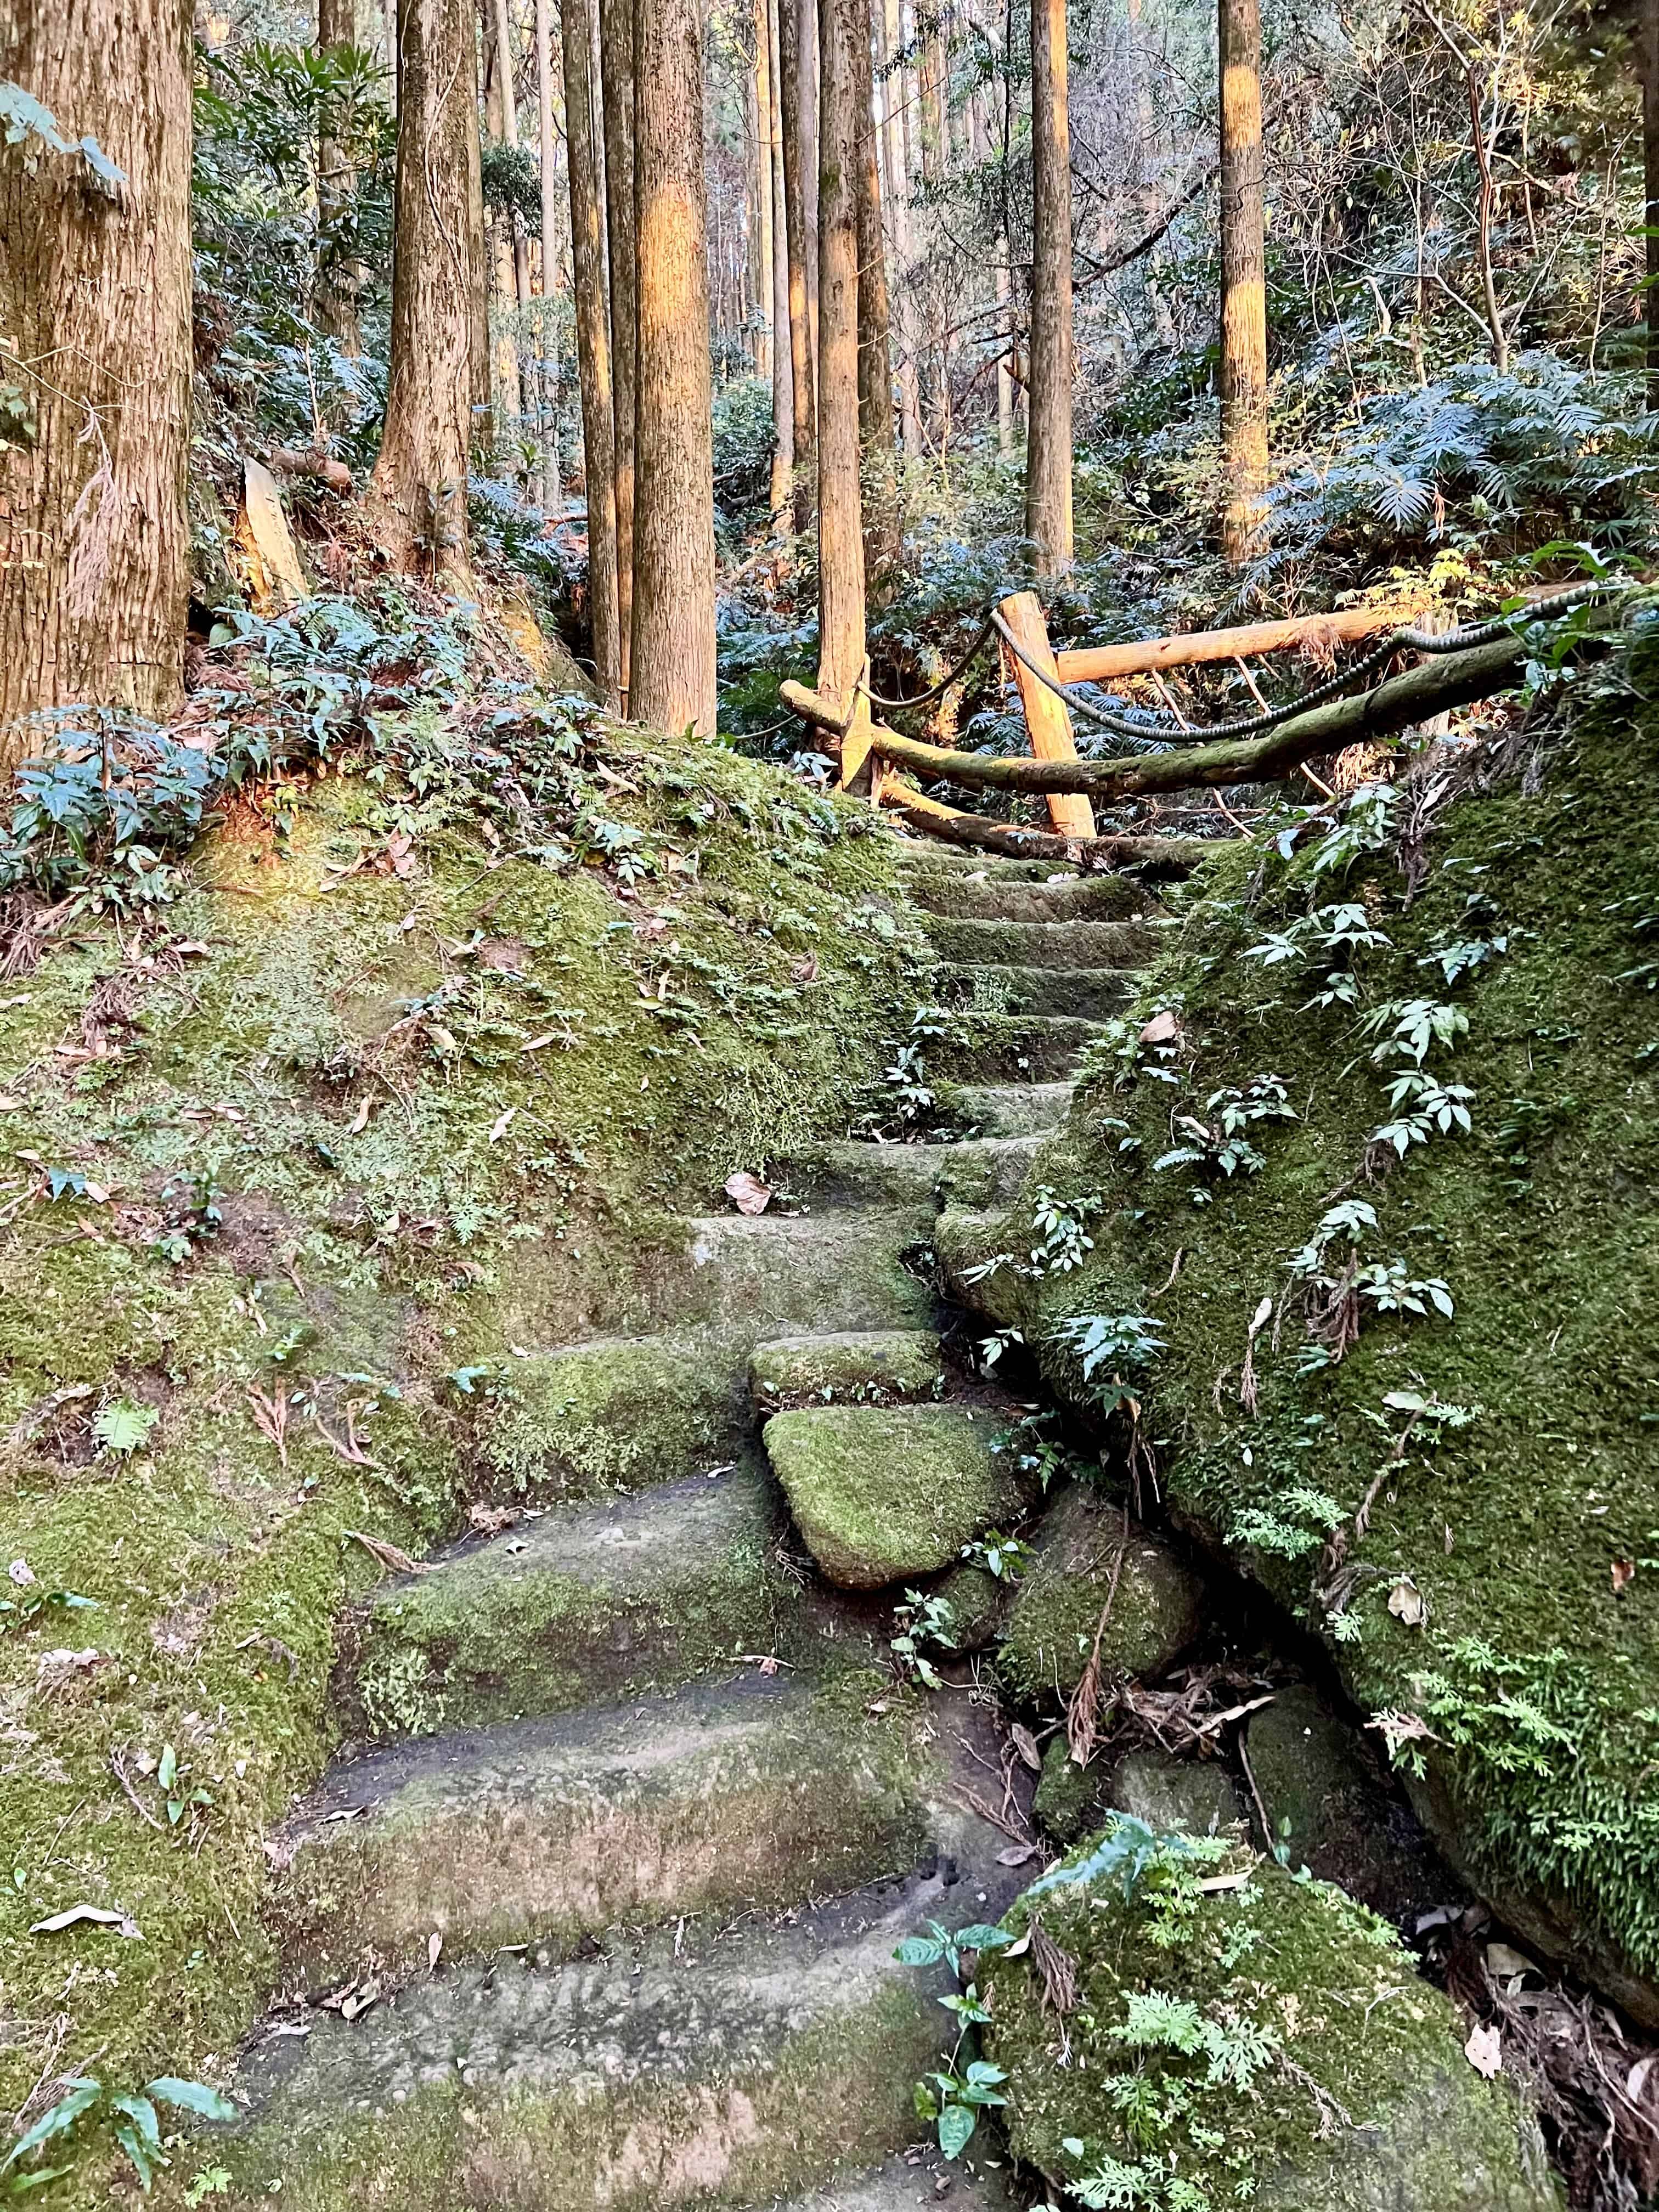 Steps hewn from stone leading to a hidden Buddhist cave.